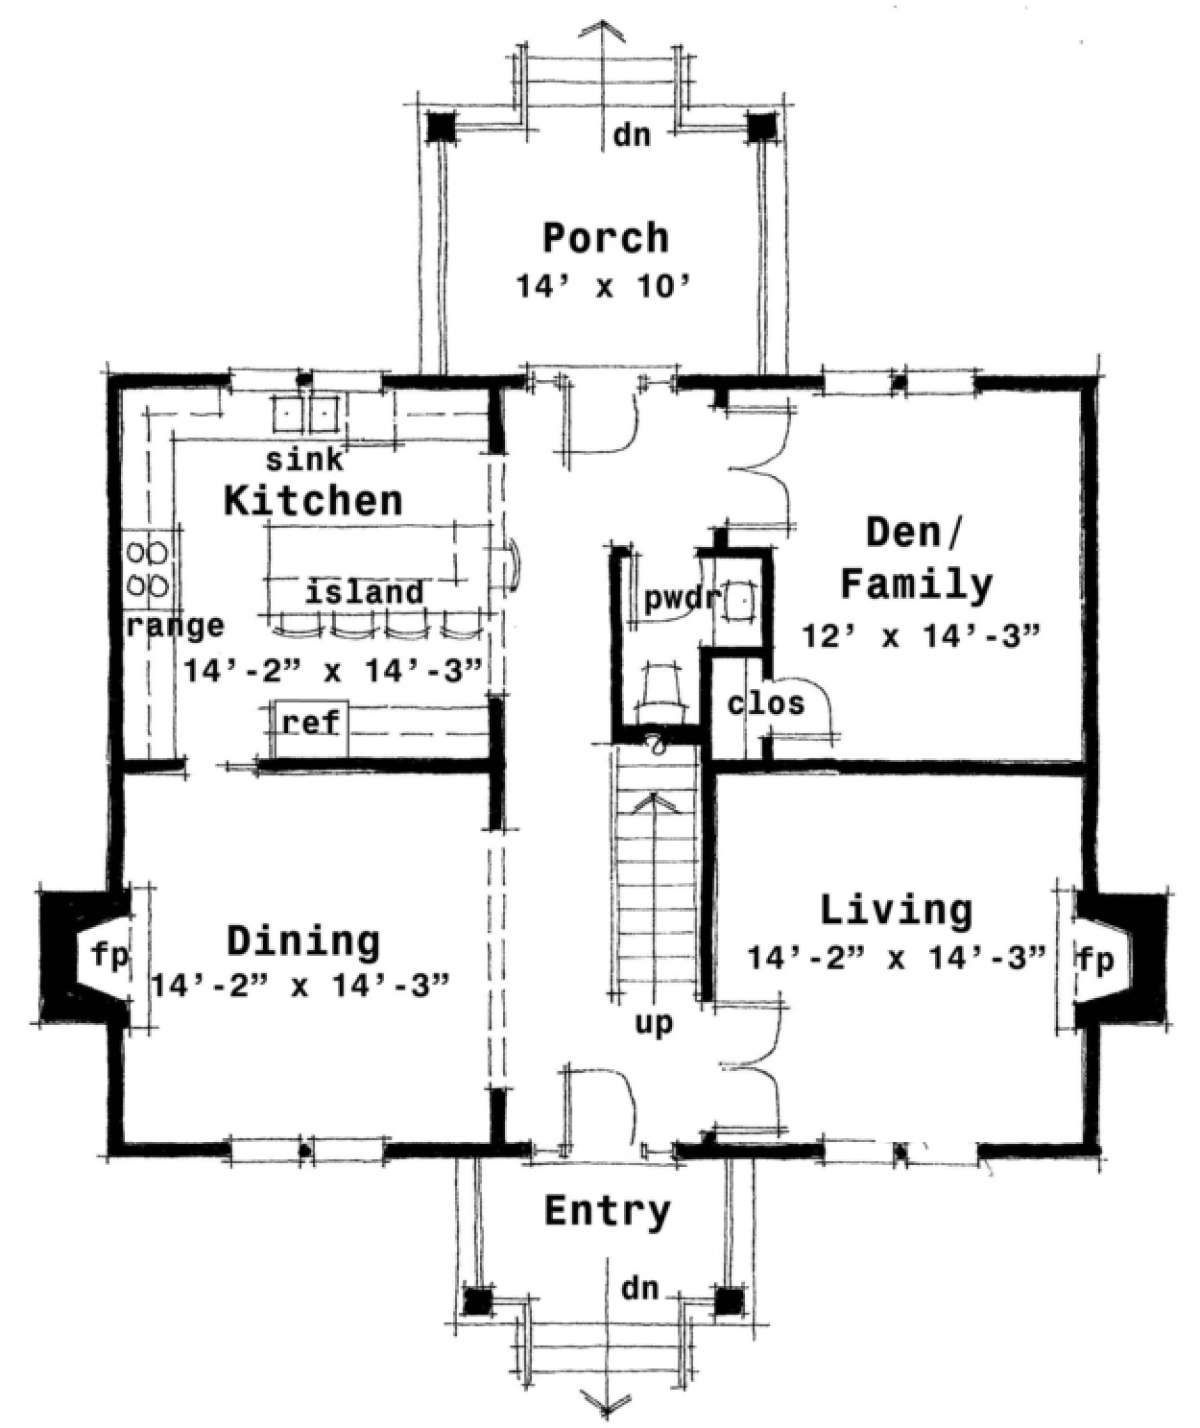 Center Hall Colonial Floor Plan, Colonial Floor Plans, Colonial Style